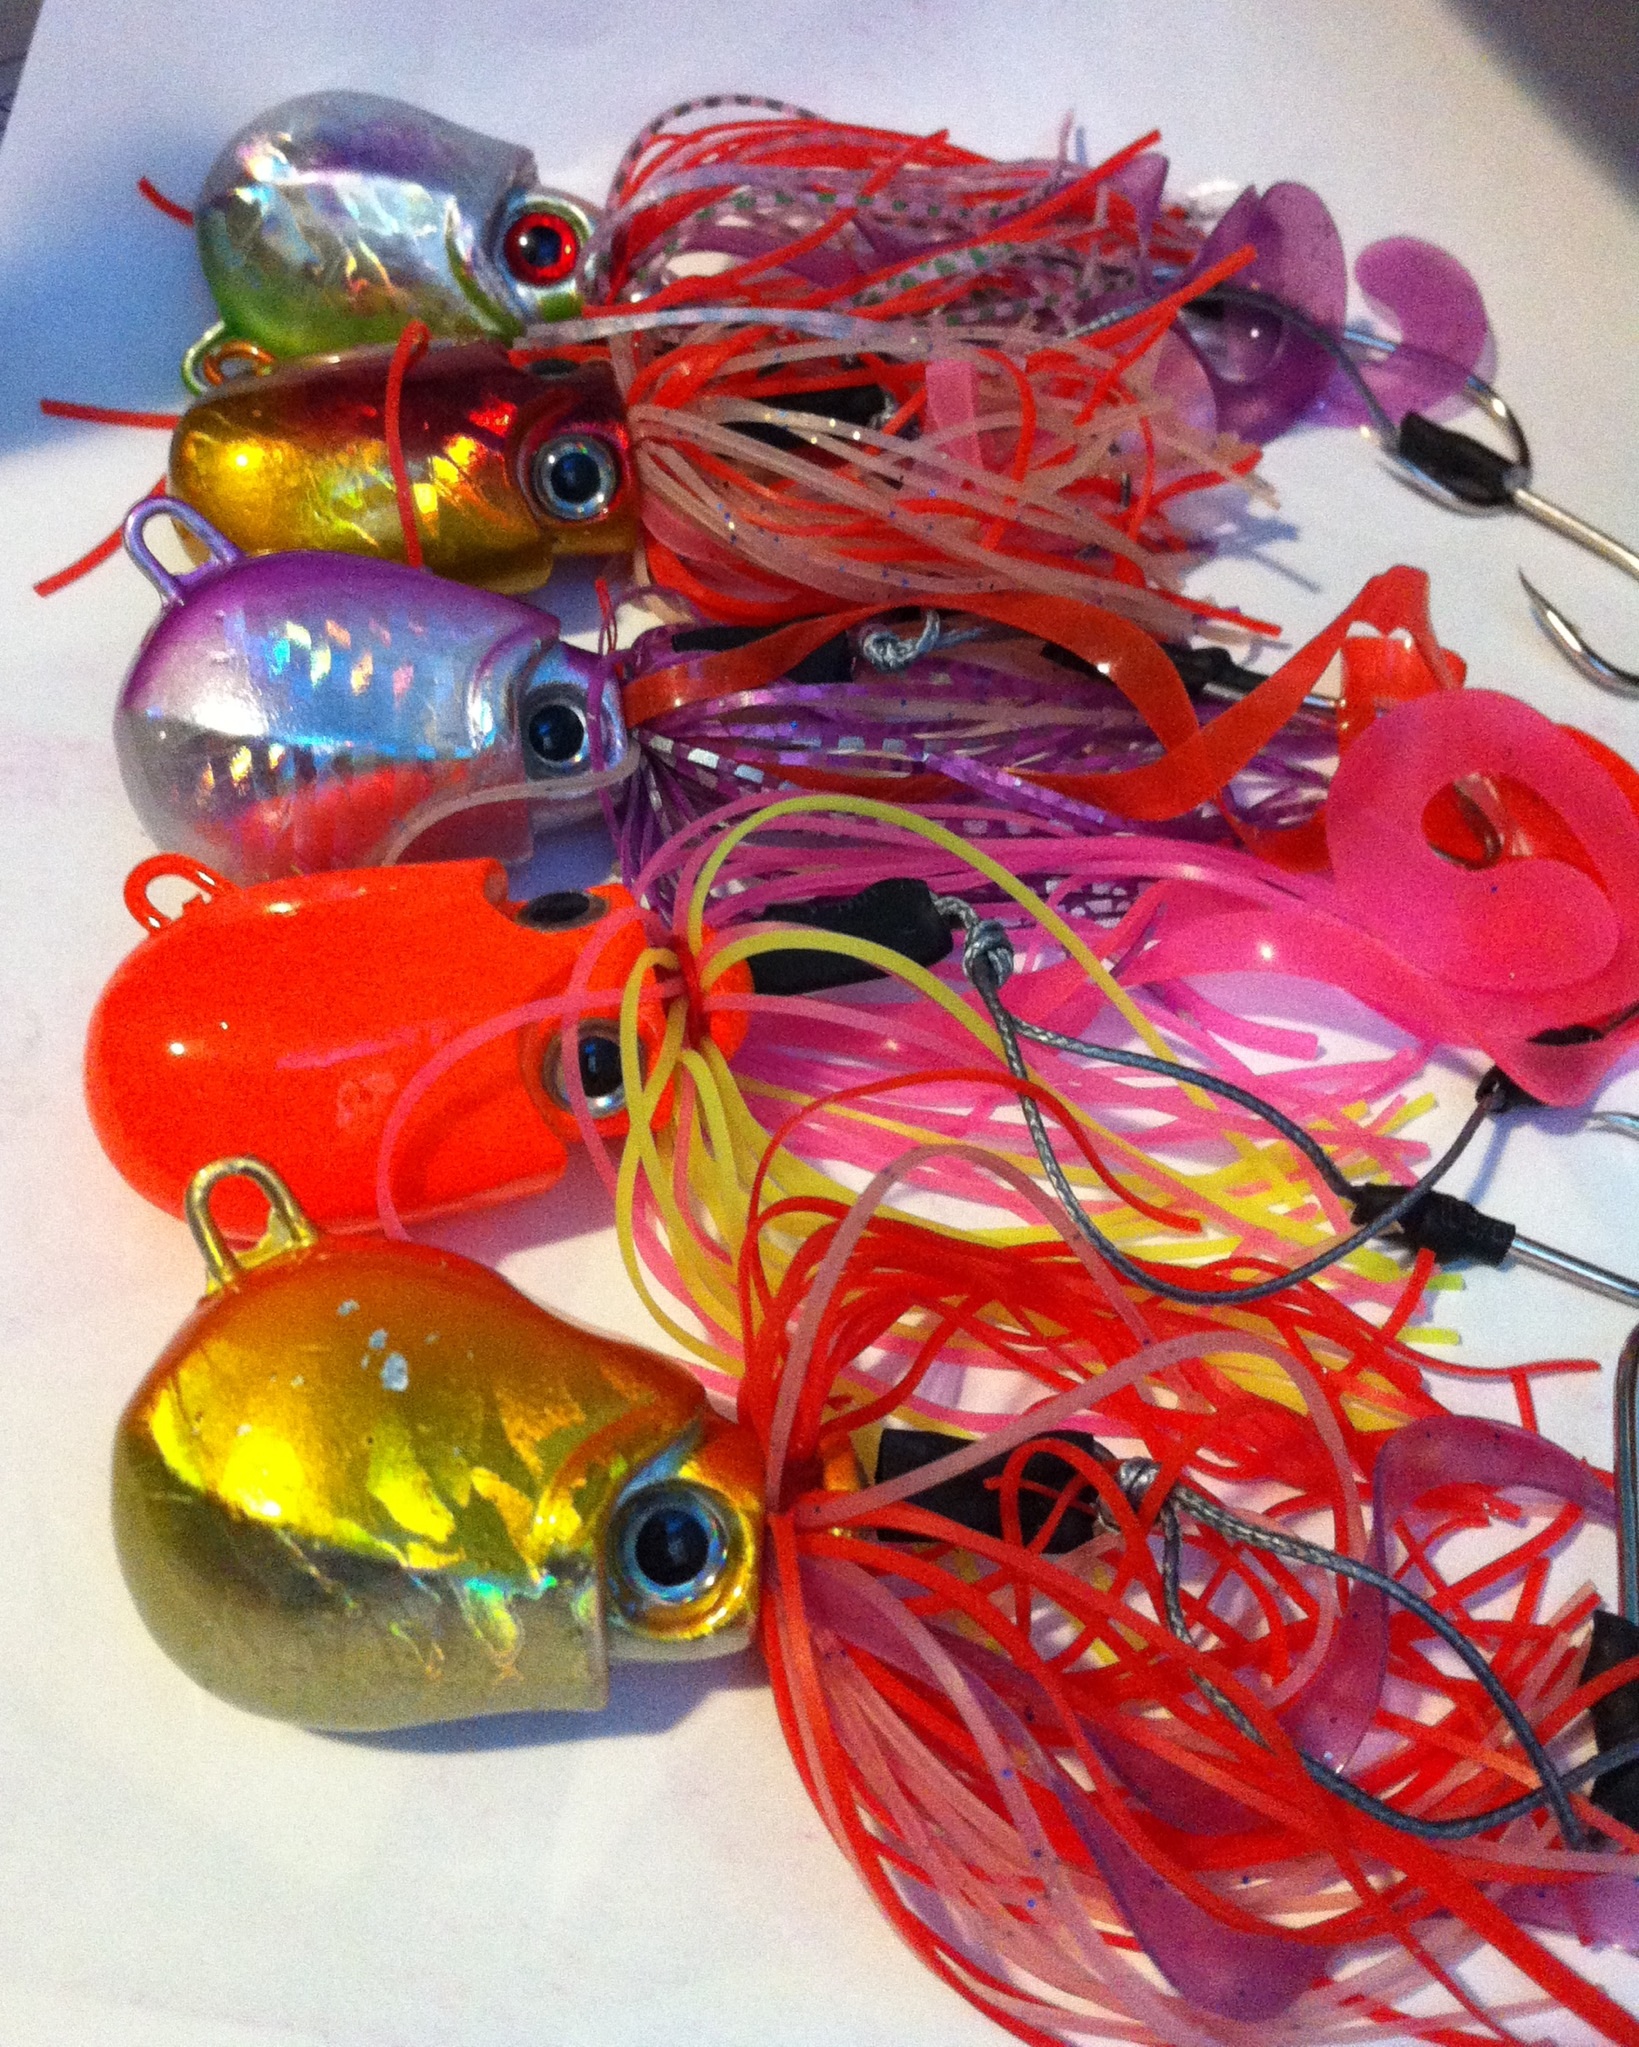 Lingcod jigs - Best Ling Cod jigs and luresBest Ling Cod jigs and